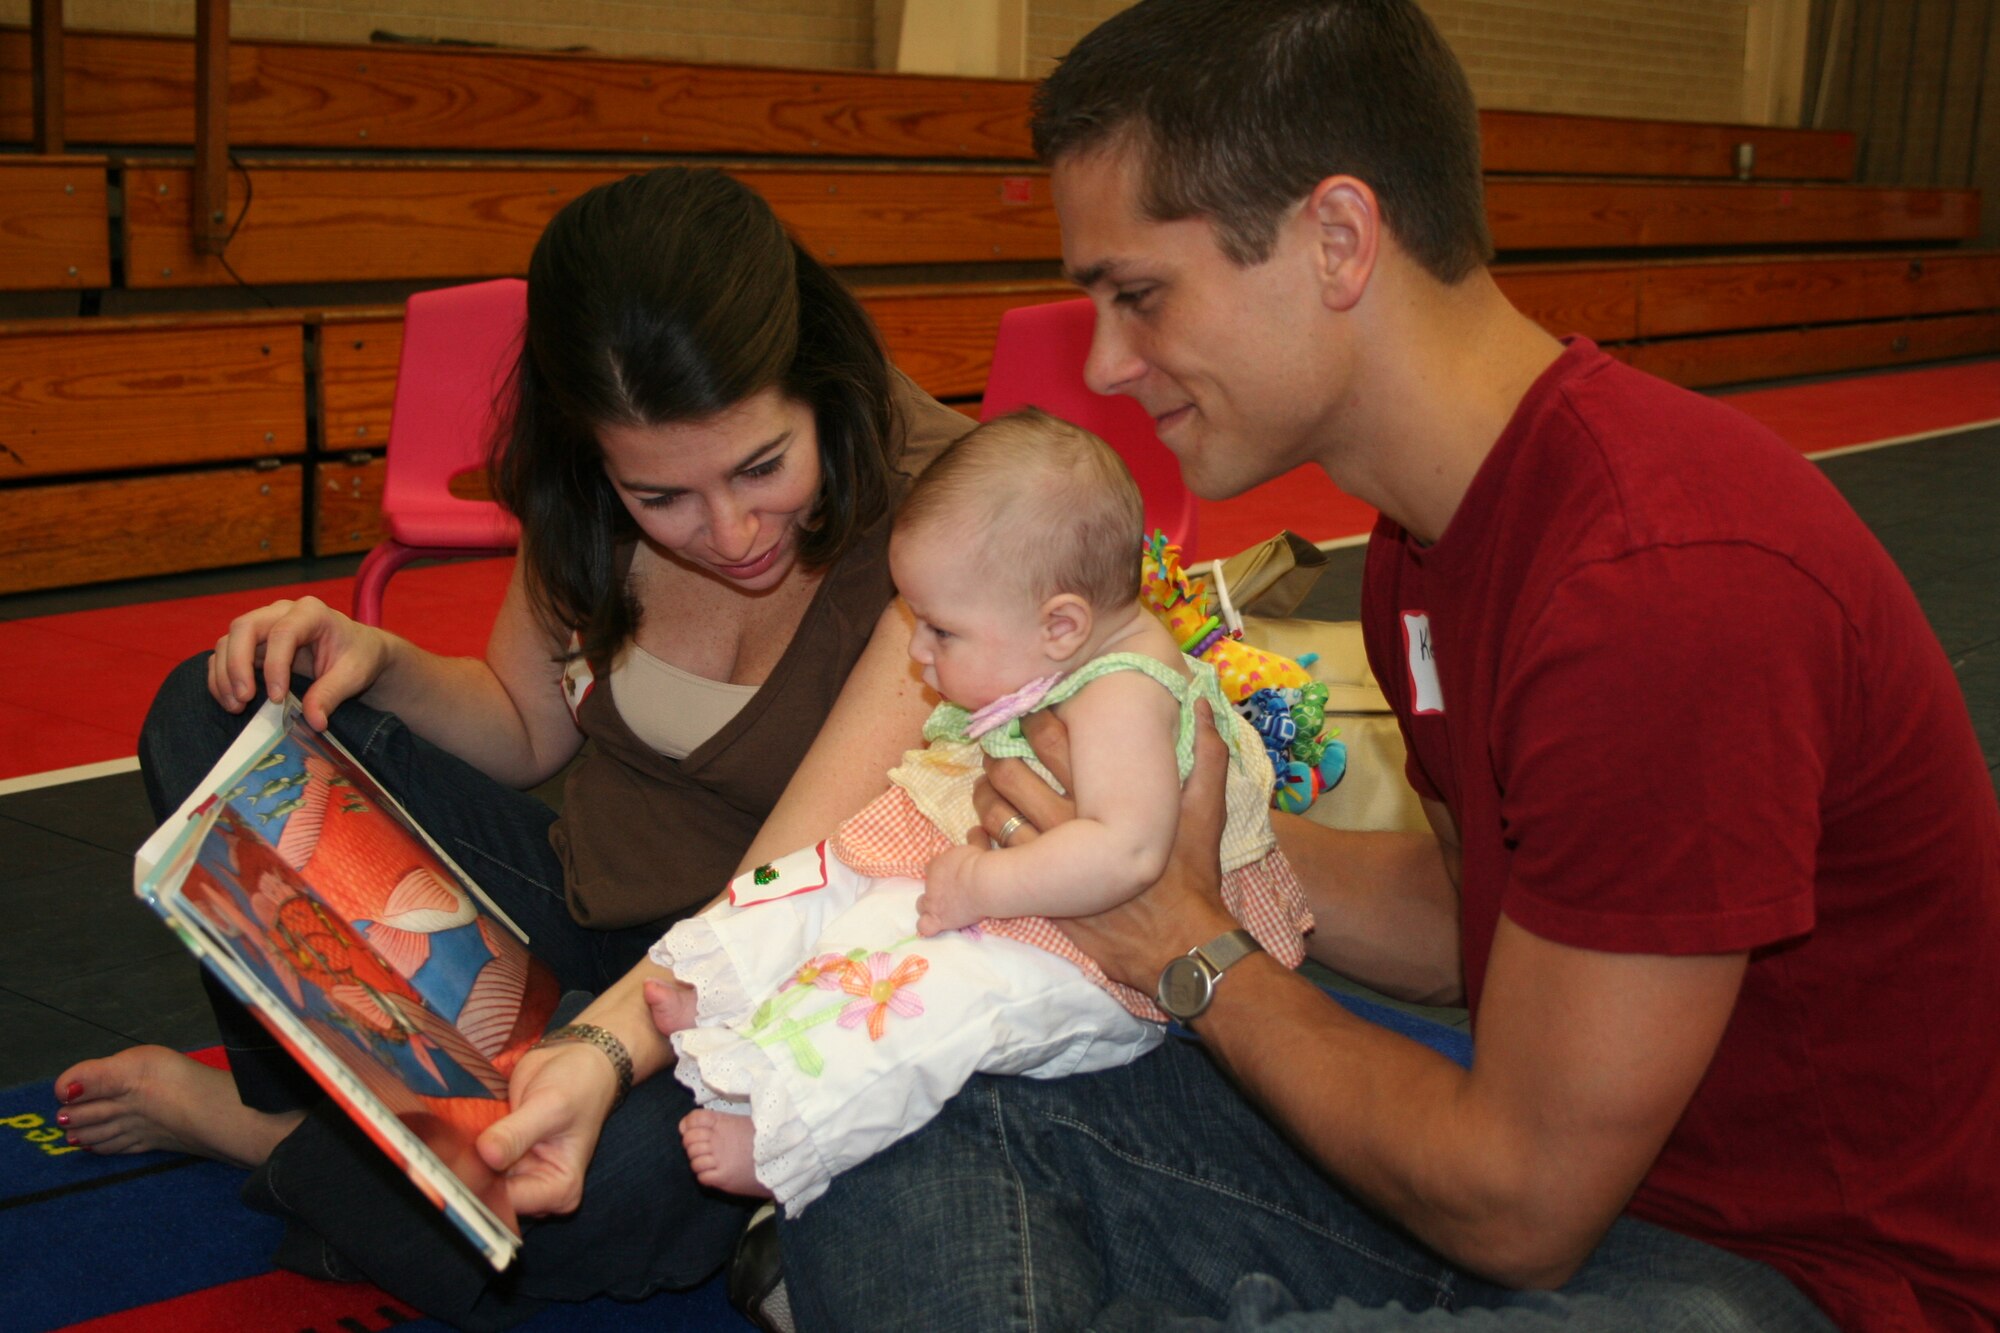 The Corso's look through a picture book with thier three month old daughter, Stella during the Tell Me a Story kick off event on Sept. 22, 23007 at Eglin Air Force Base Youth Center. The event encouraged military children, ages 0-4 to use thier imaginations. (U.S. photo by Senior Airman Ali E. Flisek)